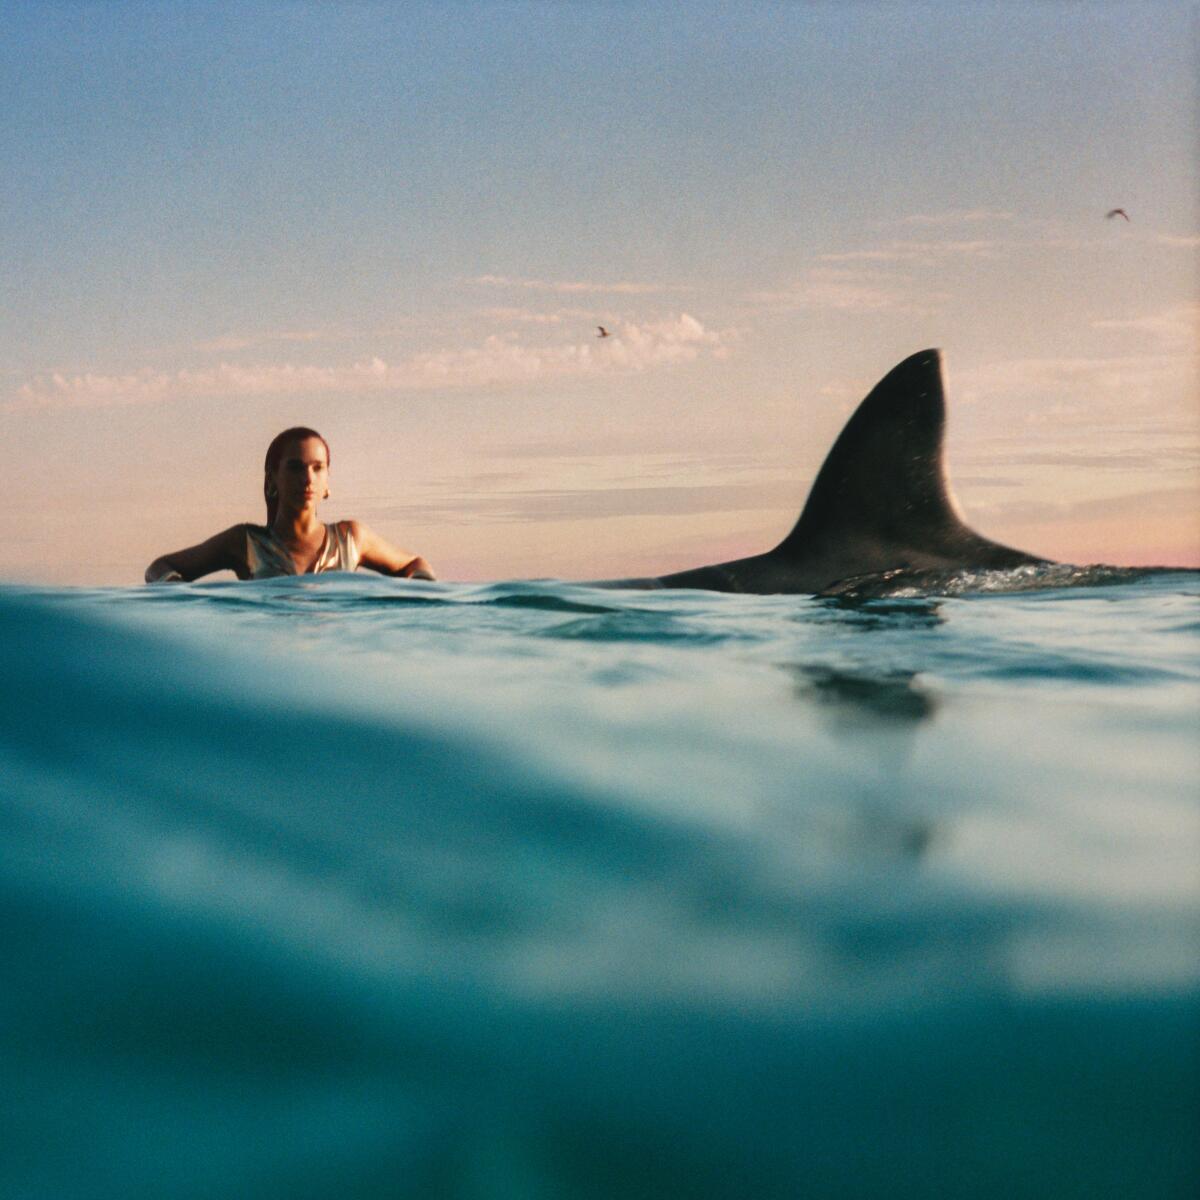 A woman at a distance in the ocean, next to a large shark fin